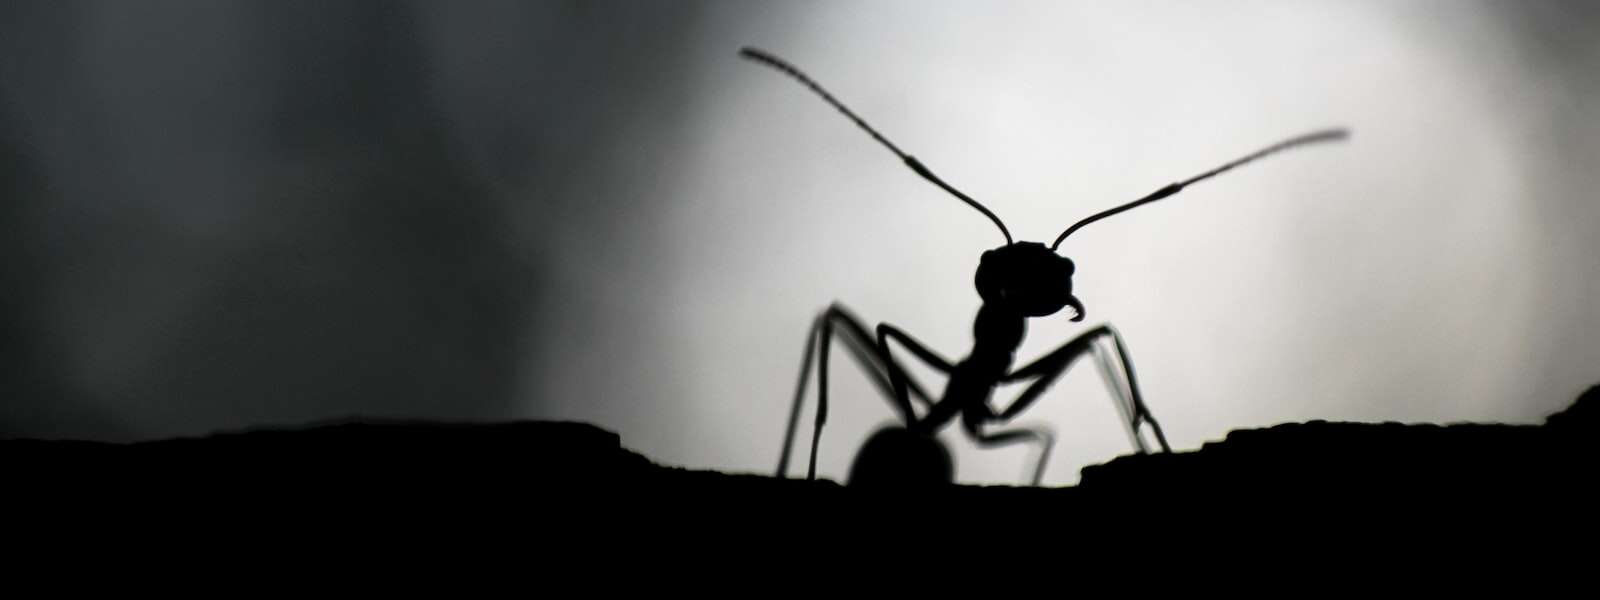 A black ant silhouetted